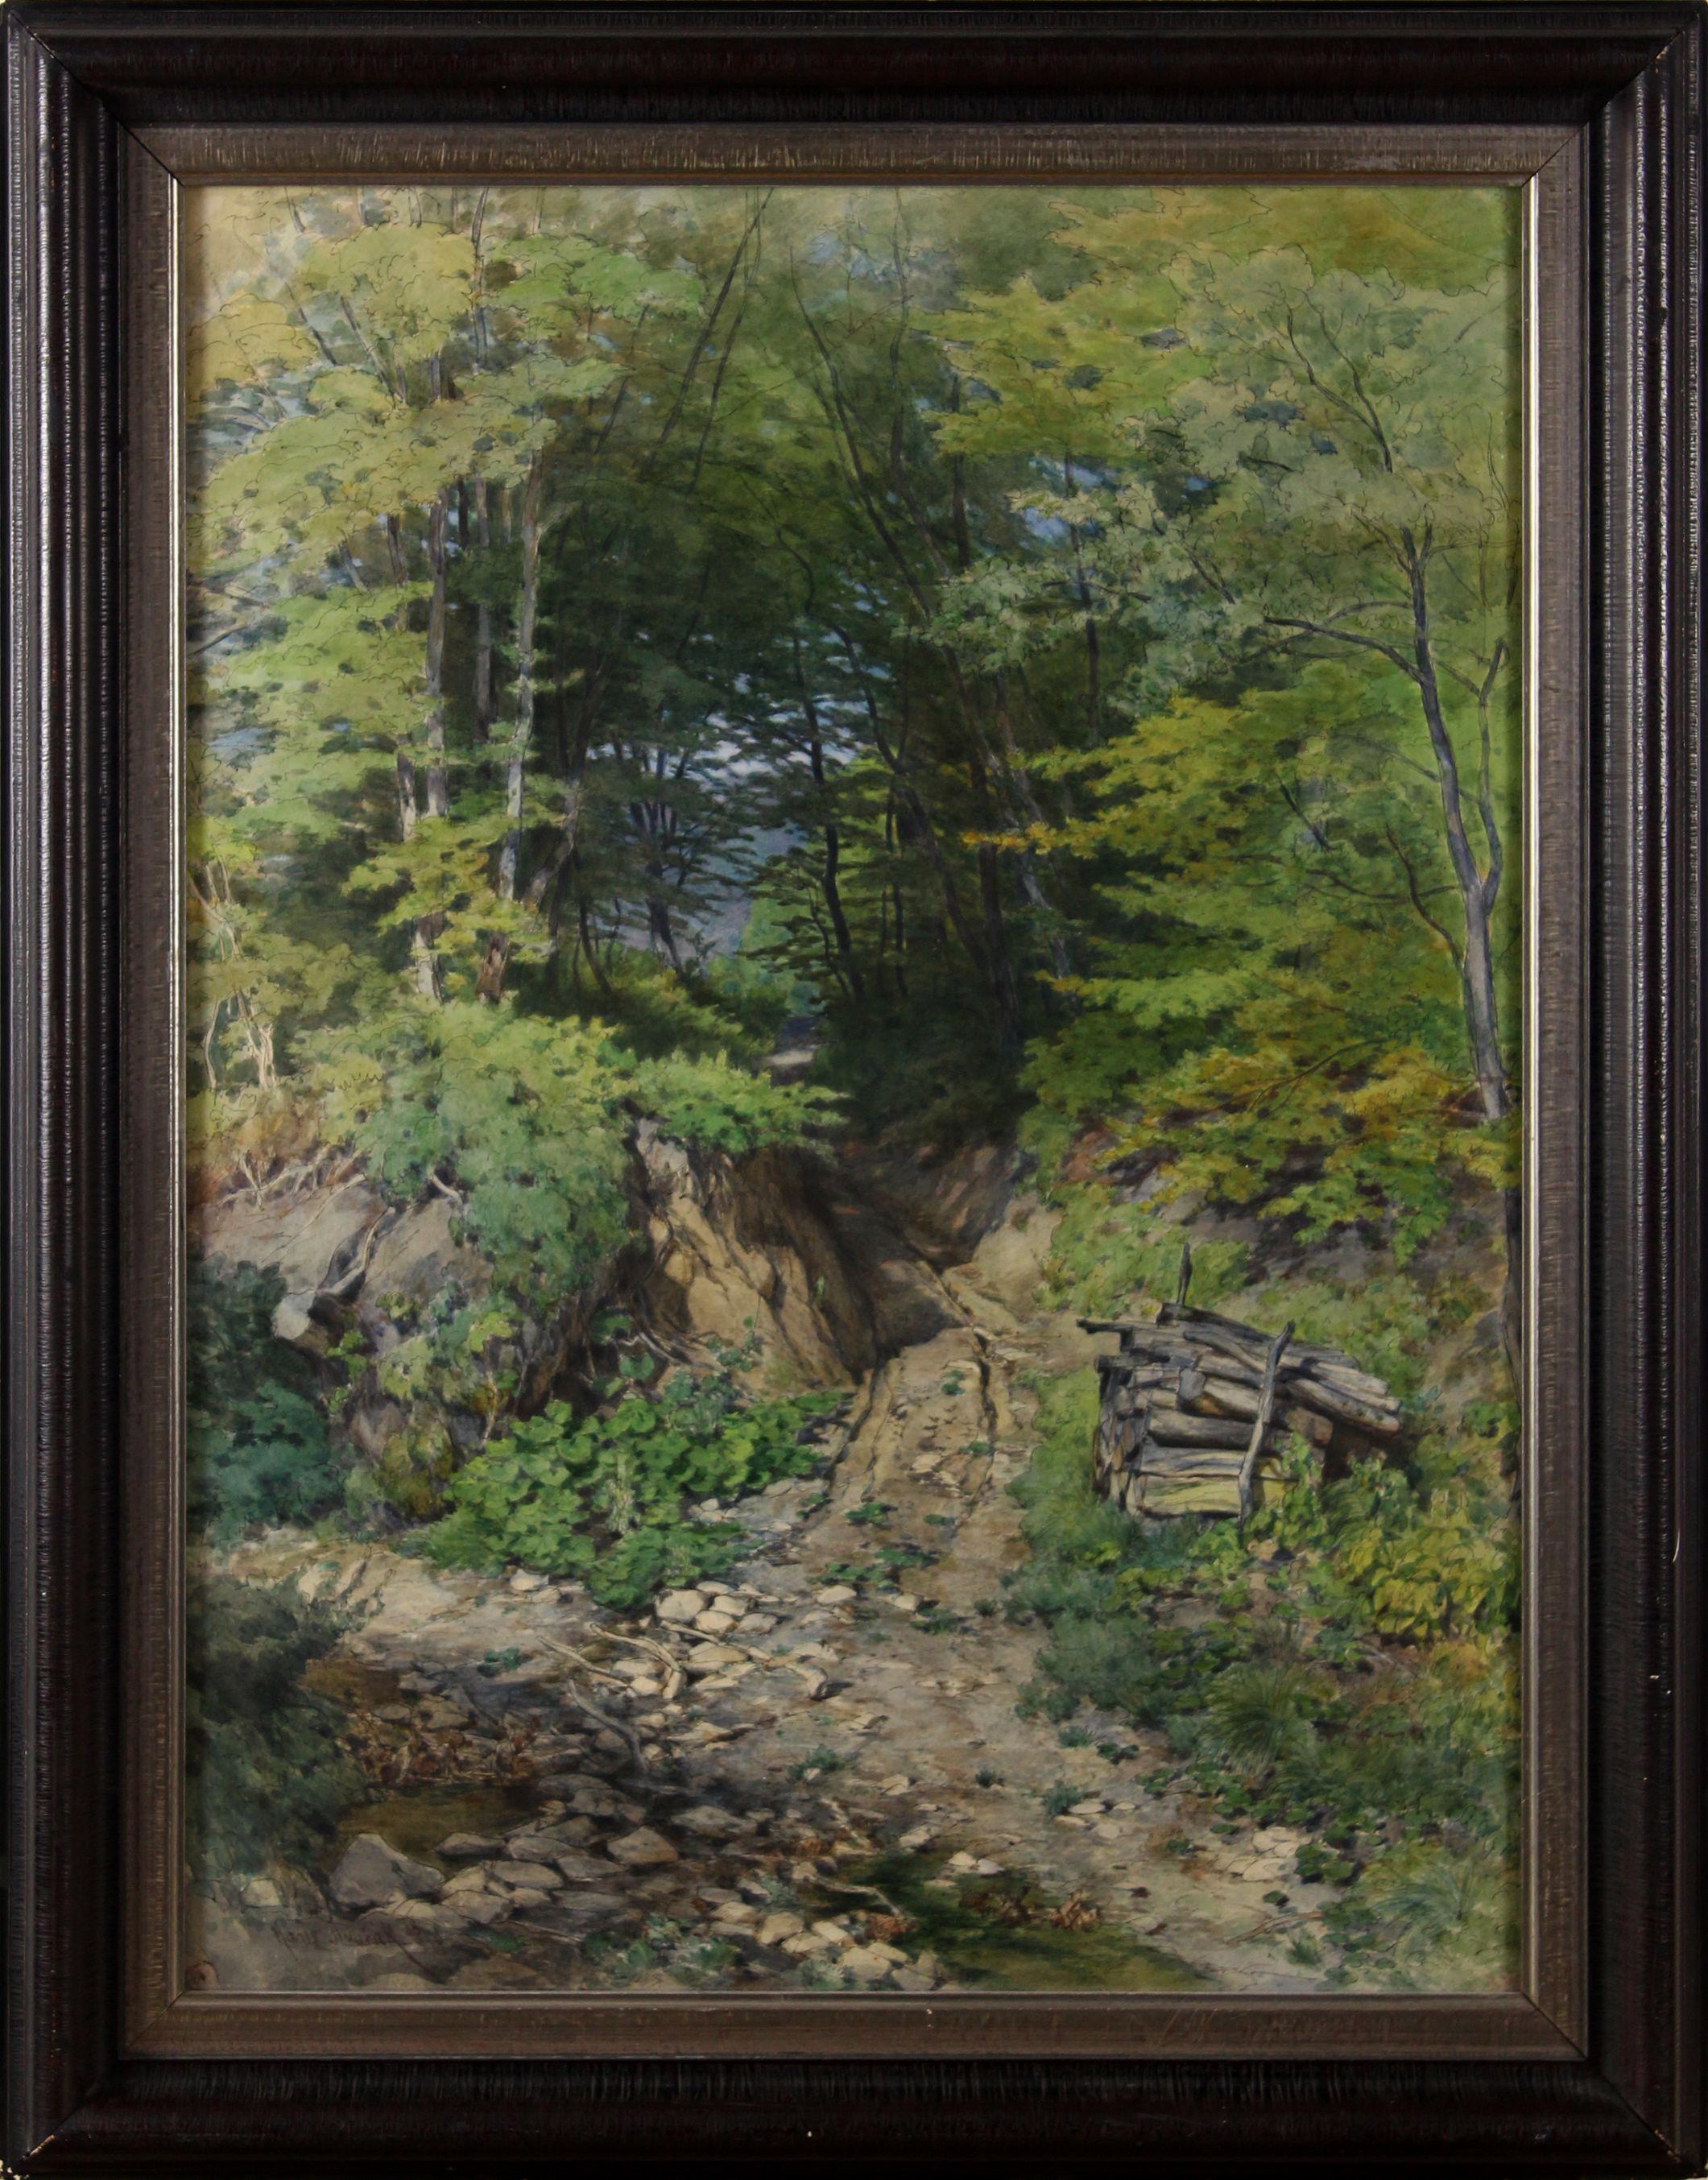 Shady hollow way - Into the heart of the forest - - Art by Hans Dvoràk